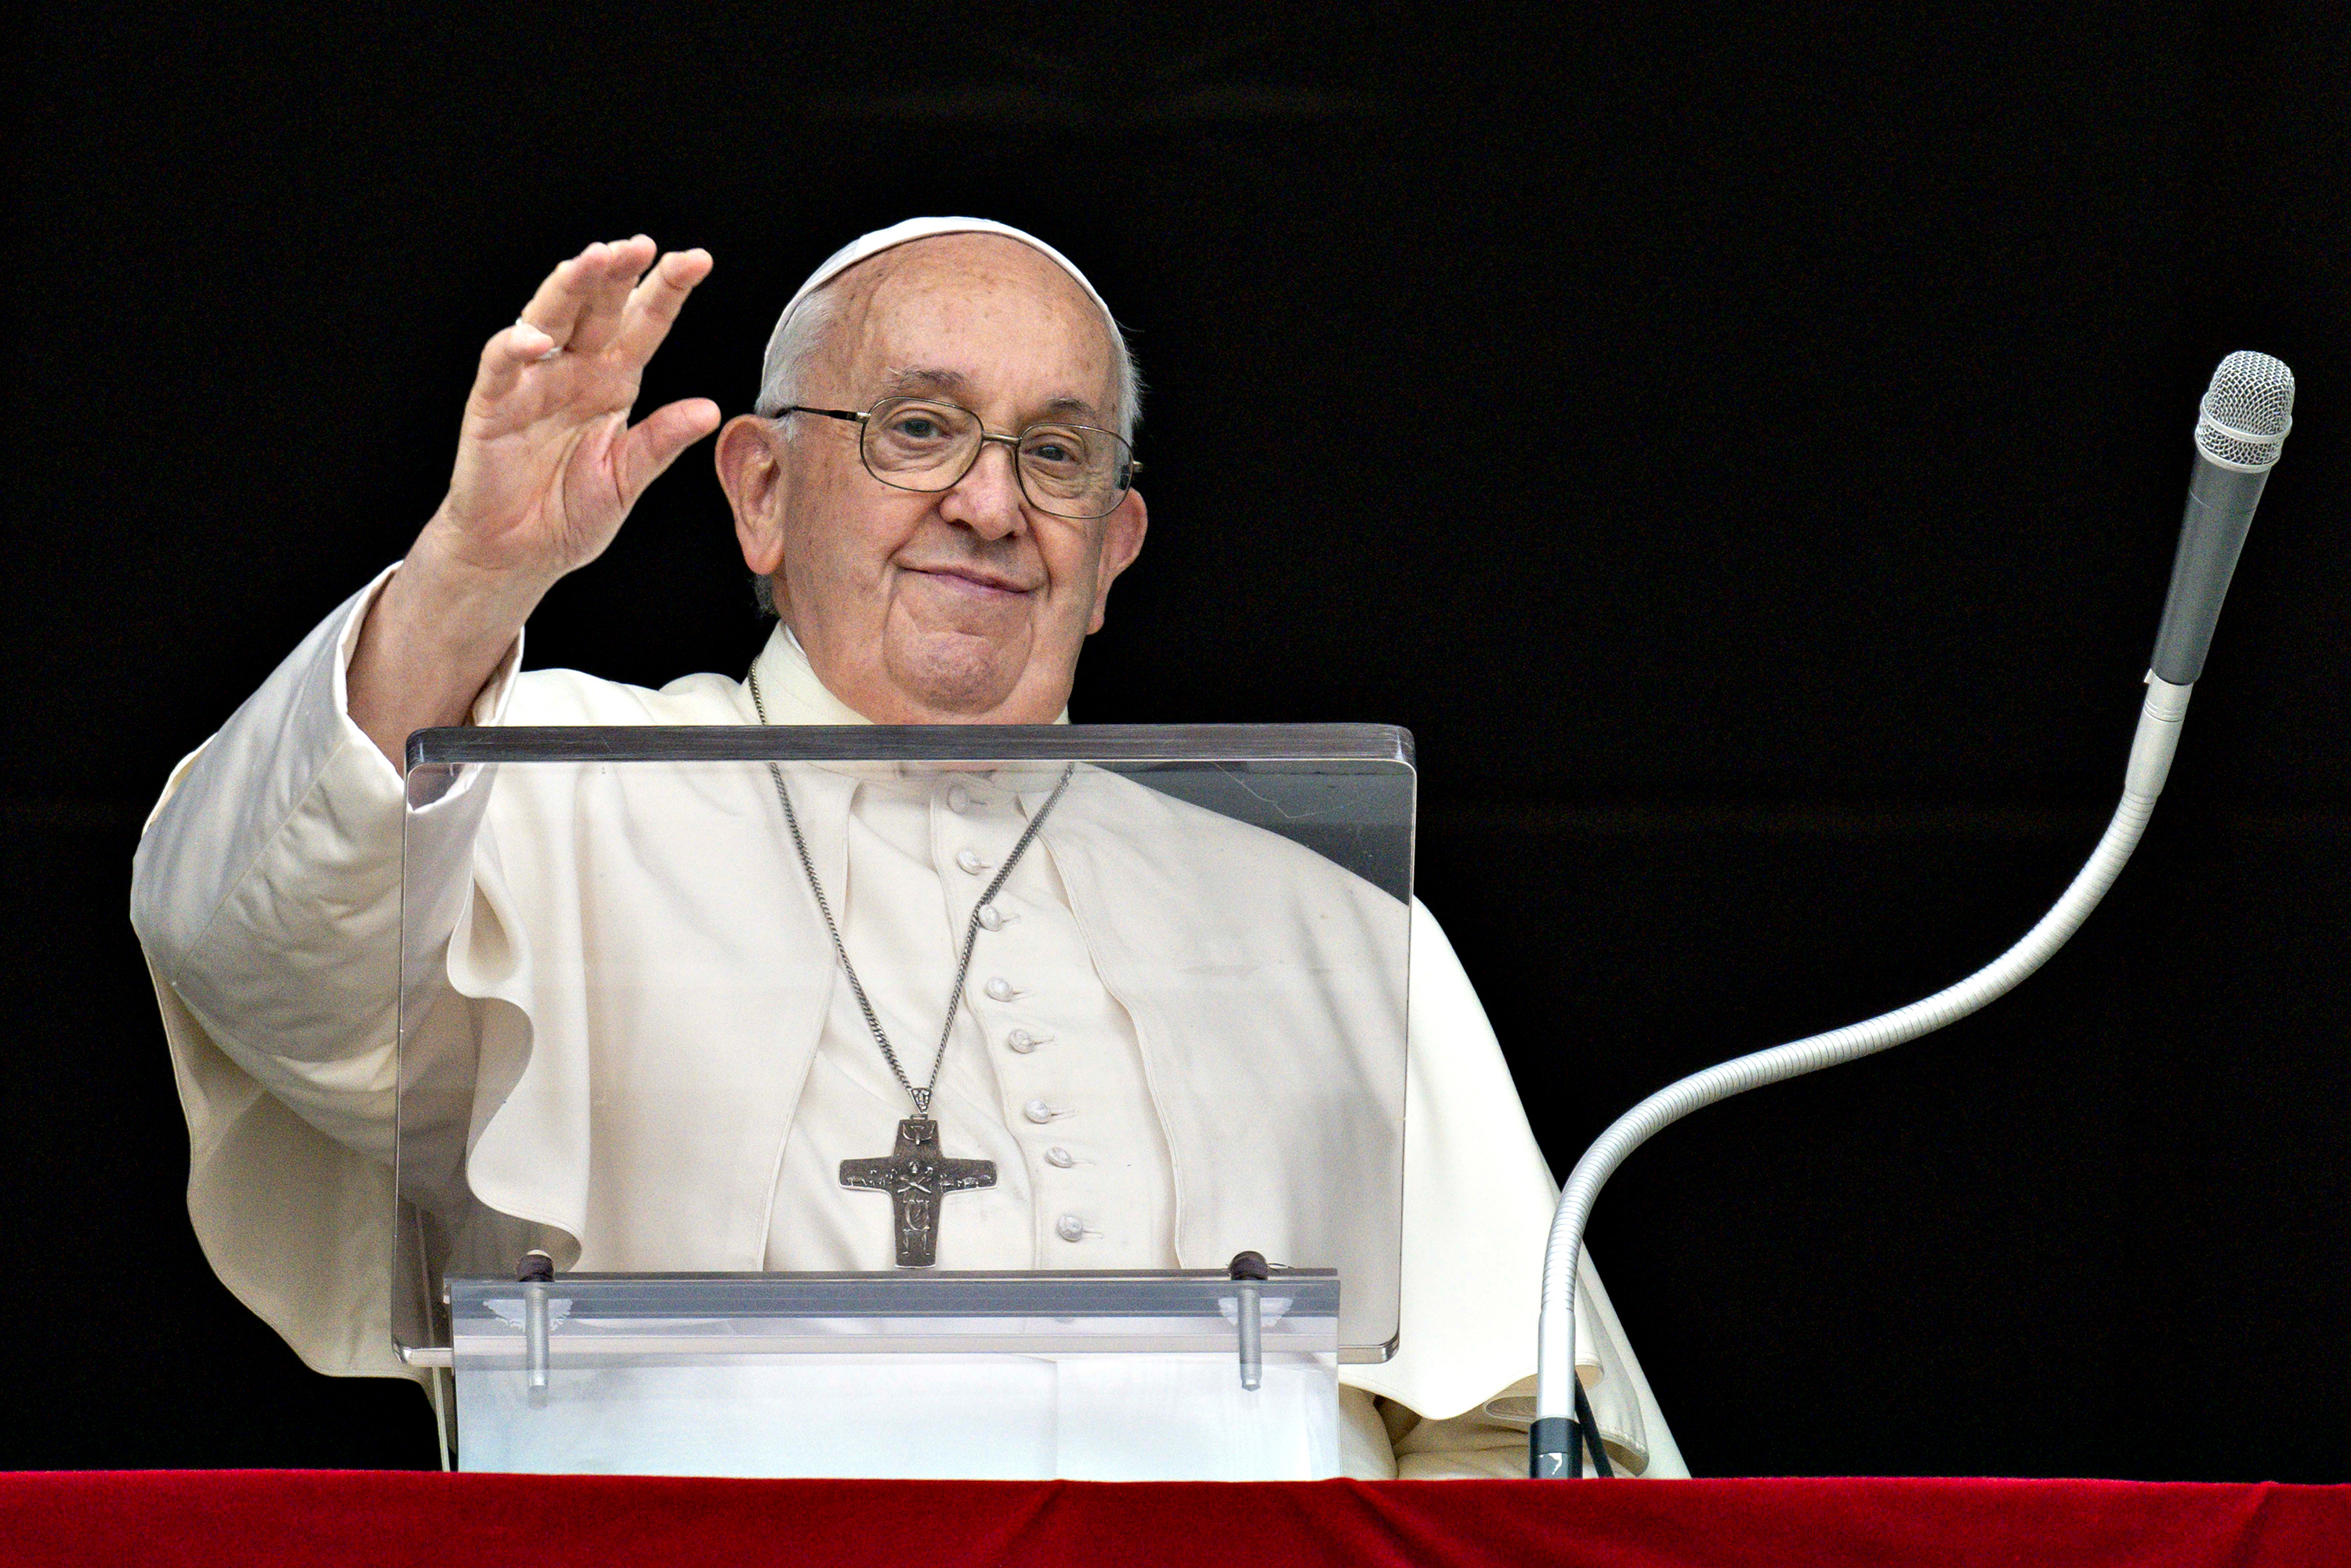 Pope Francis greets visitors in Vatican City, on November 1.